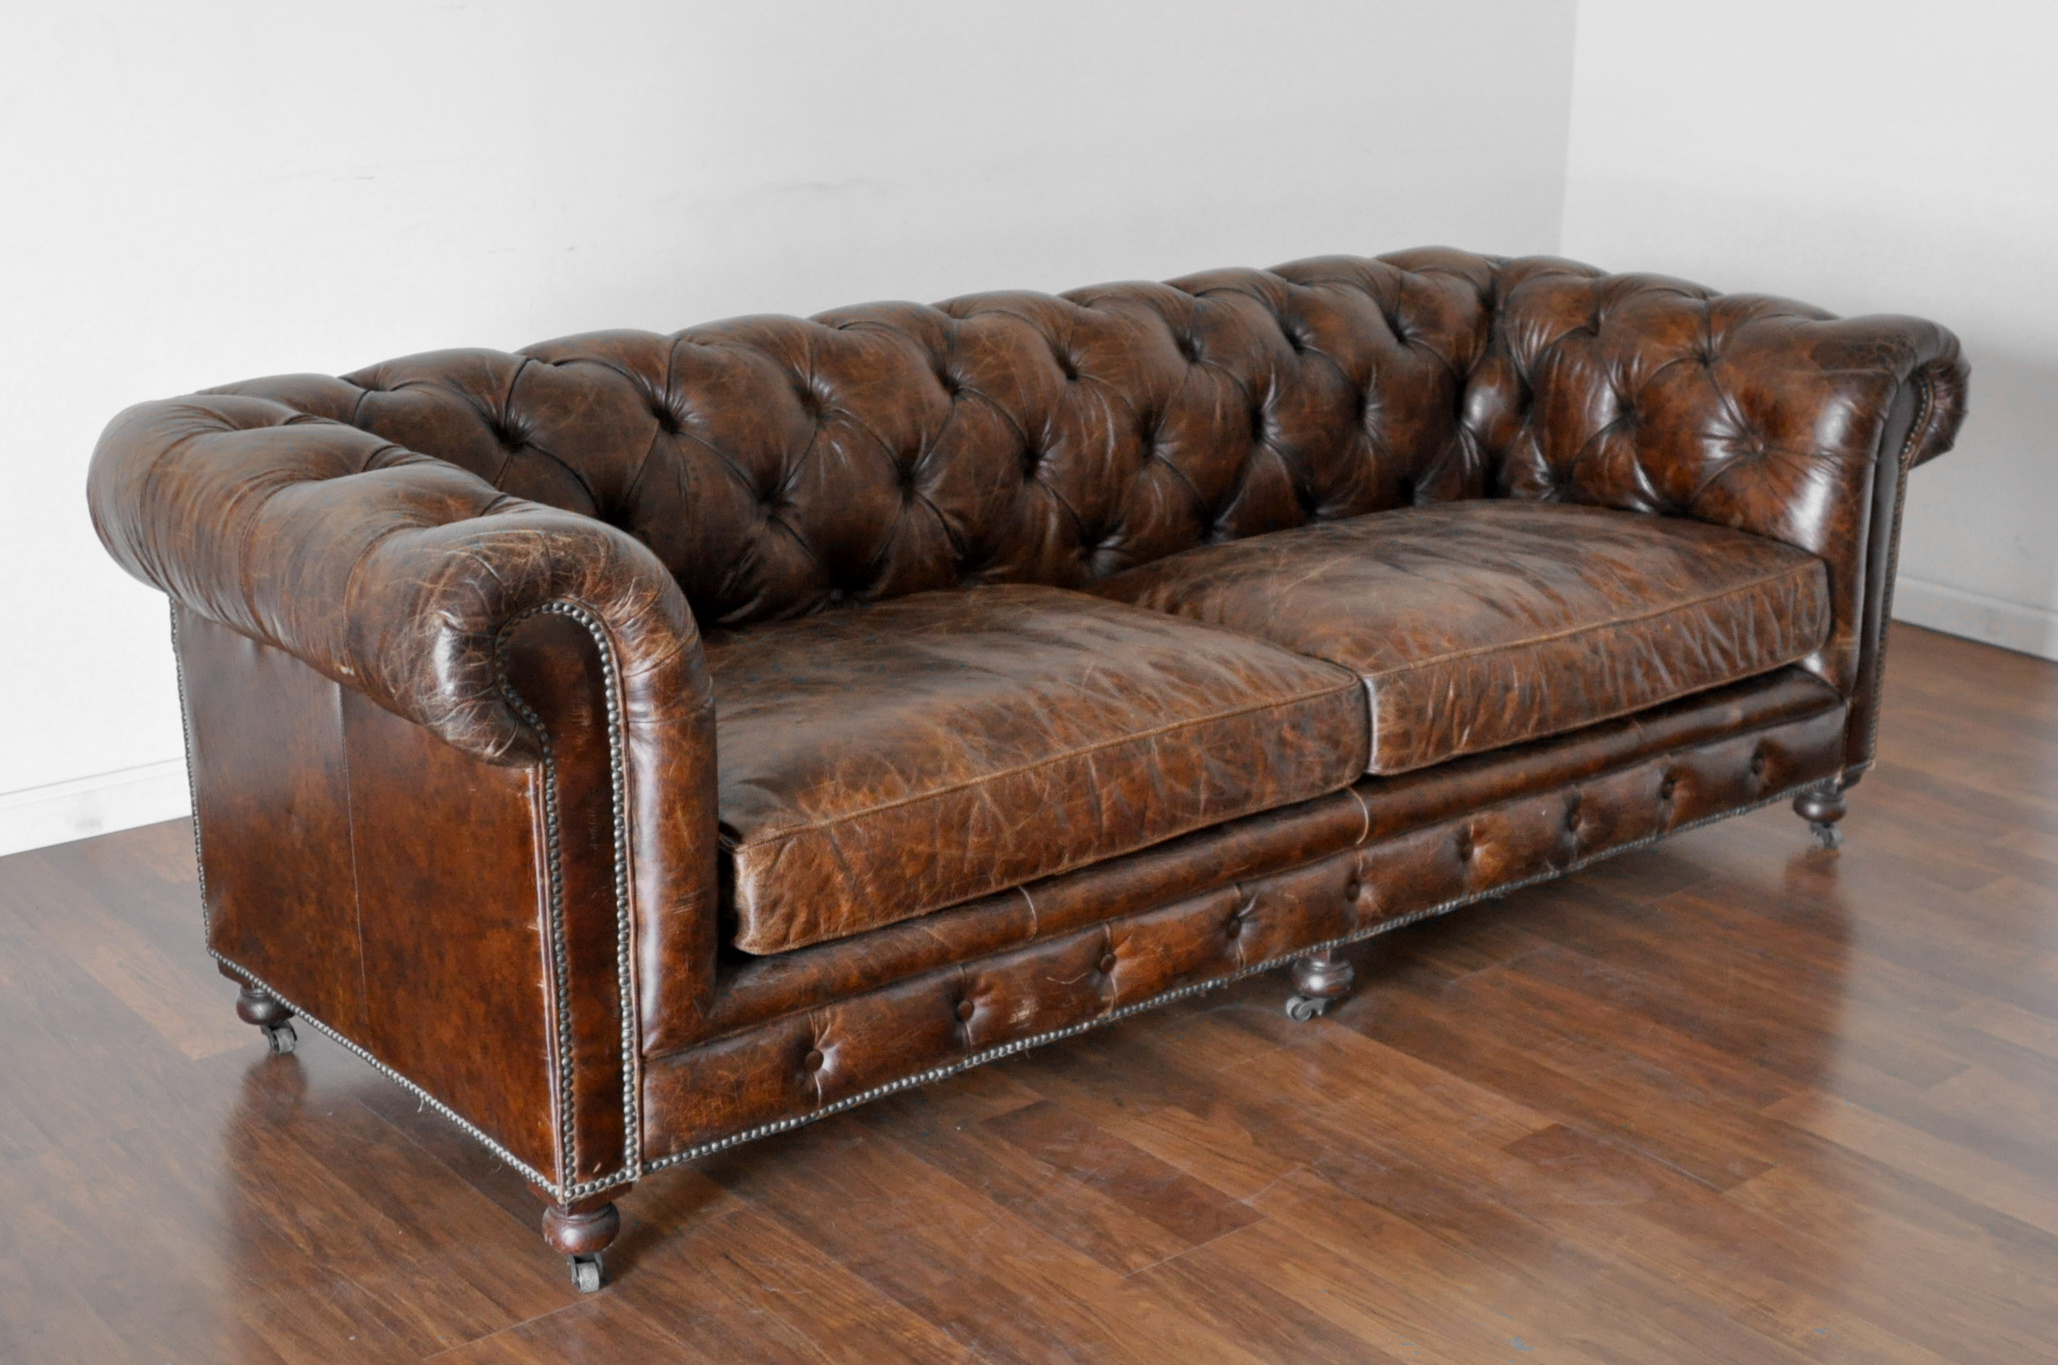 Full-size sofa design: leather sofa in a used-look sectional reclining sofa distressed SEXDGID